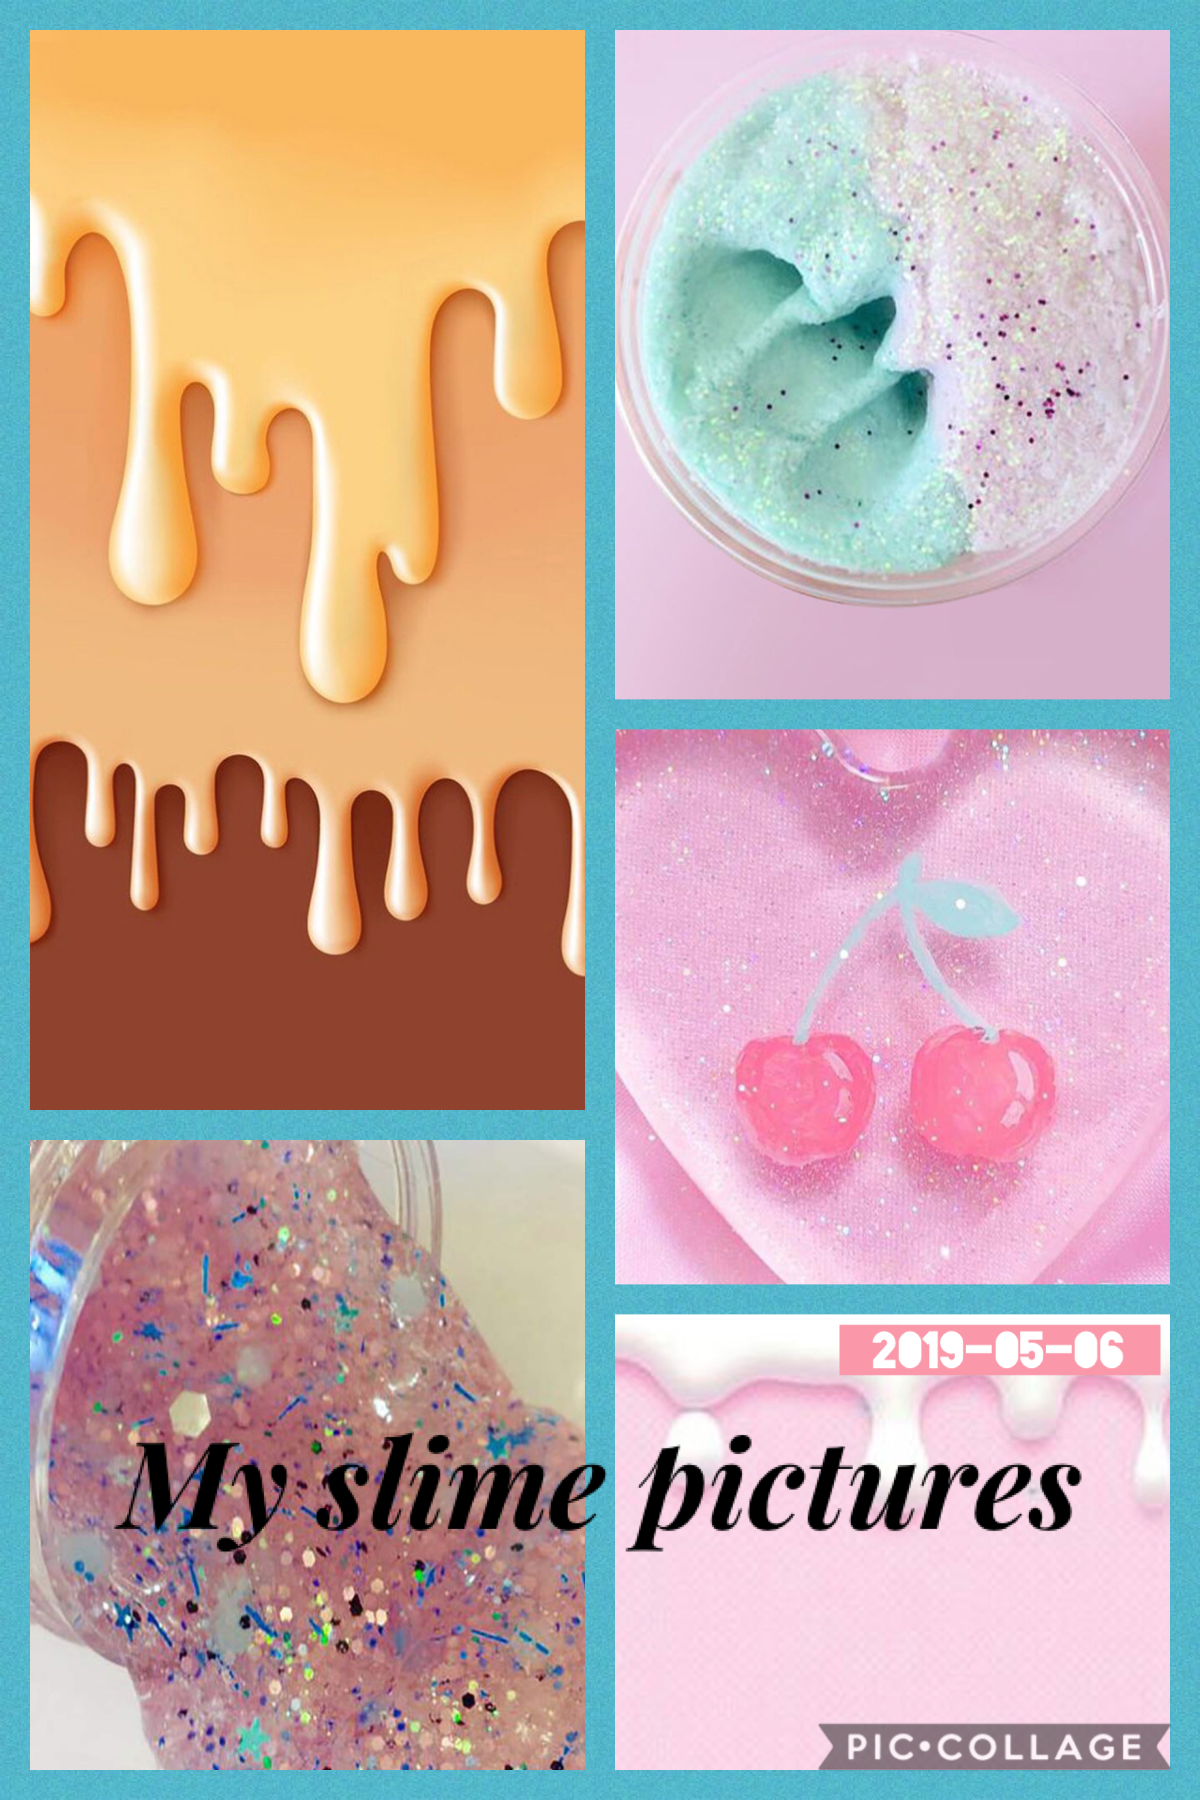 My slime pictures 